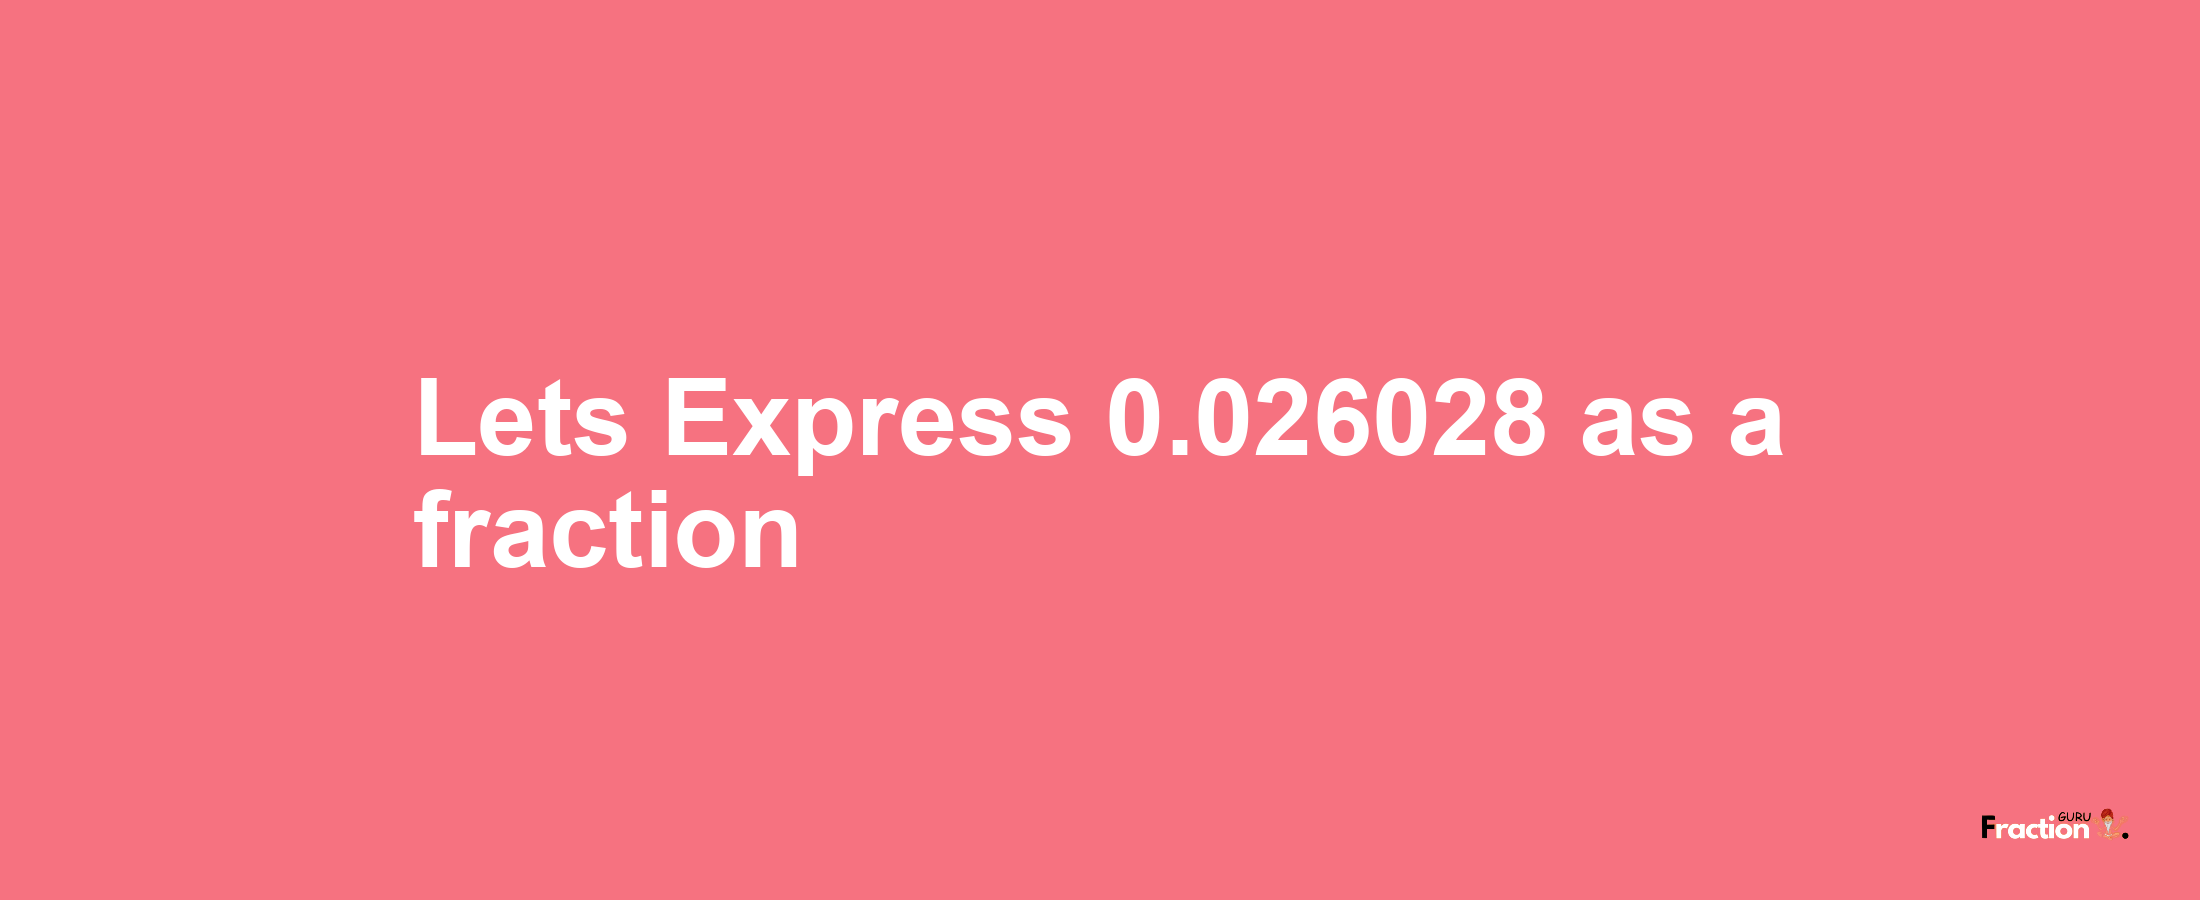 Lets Express 0.026028 as afraction